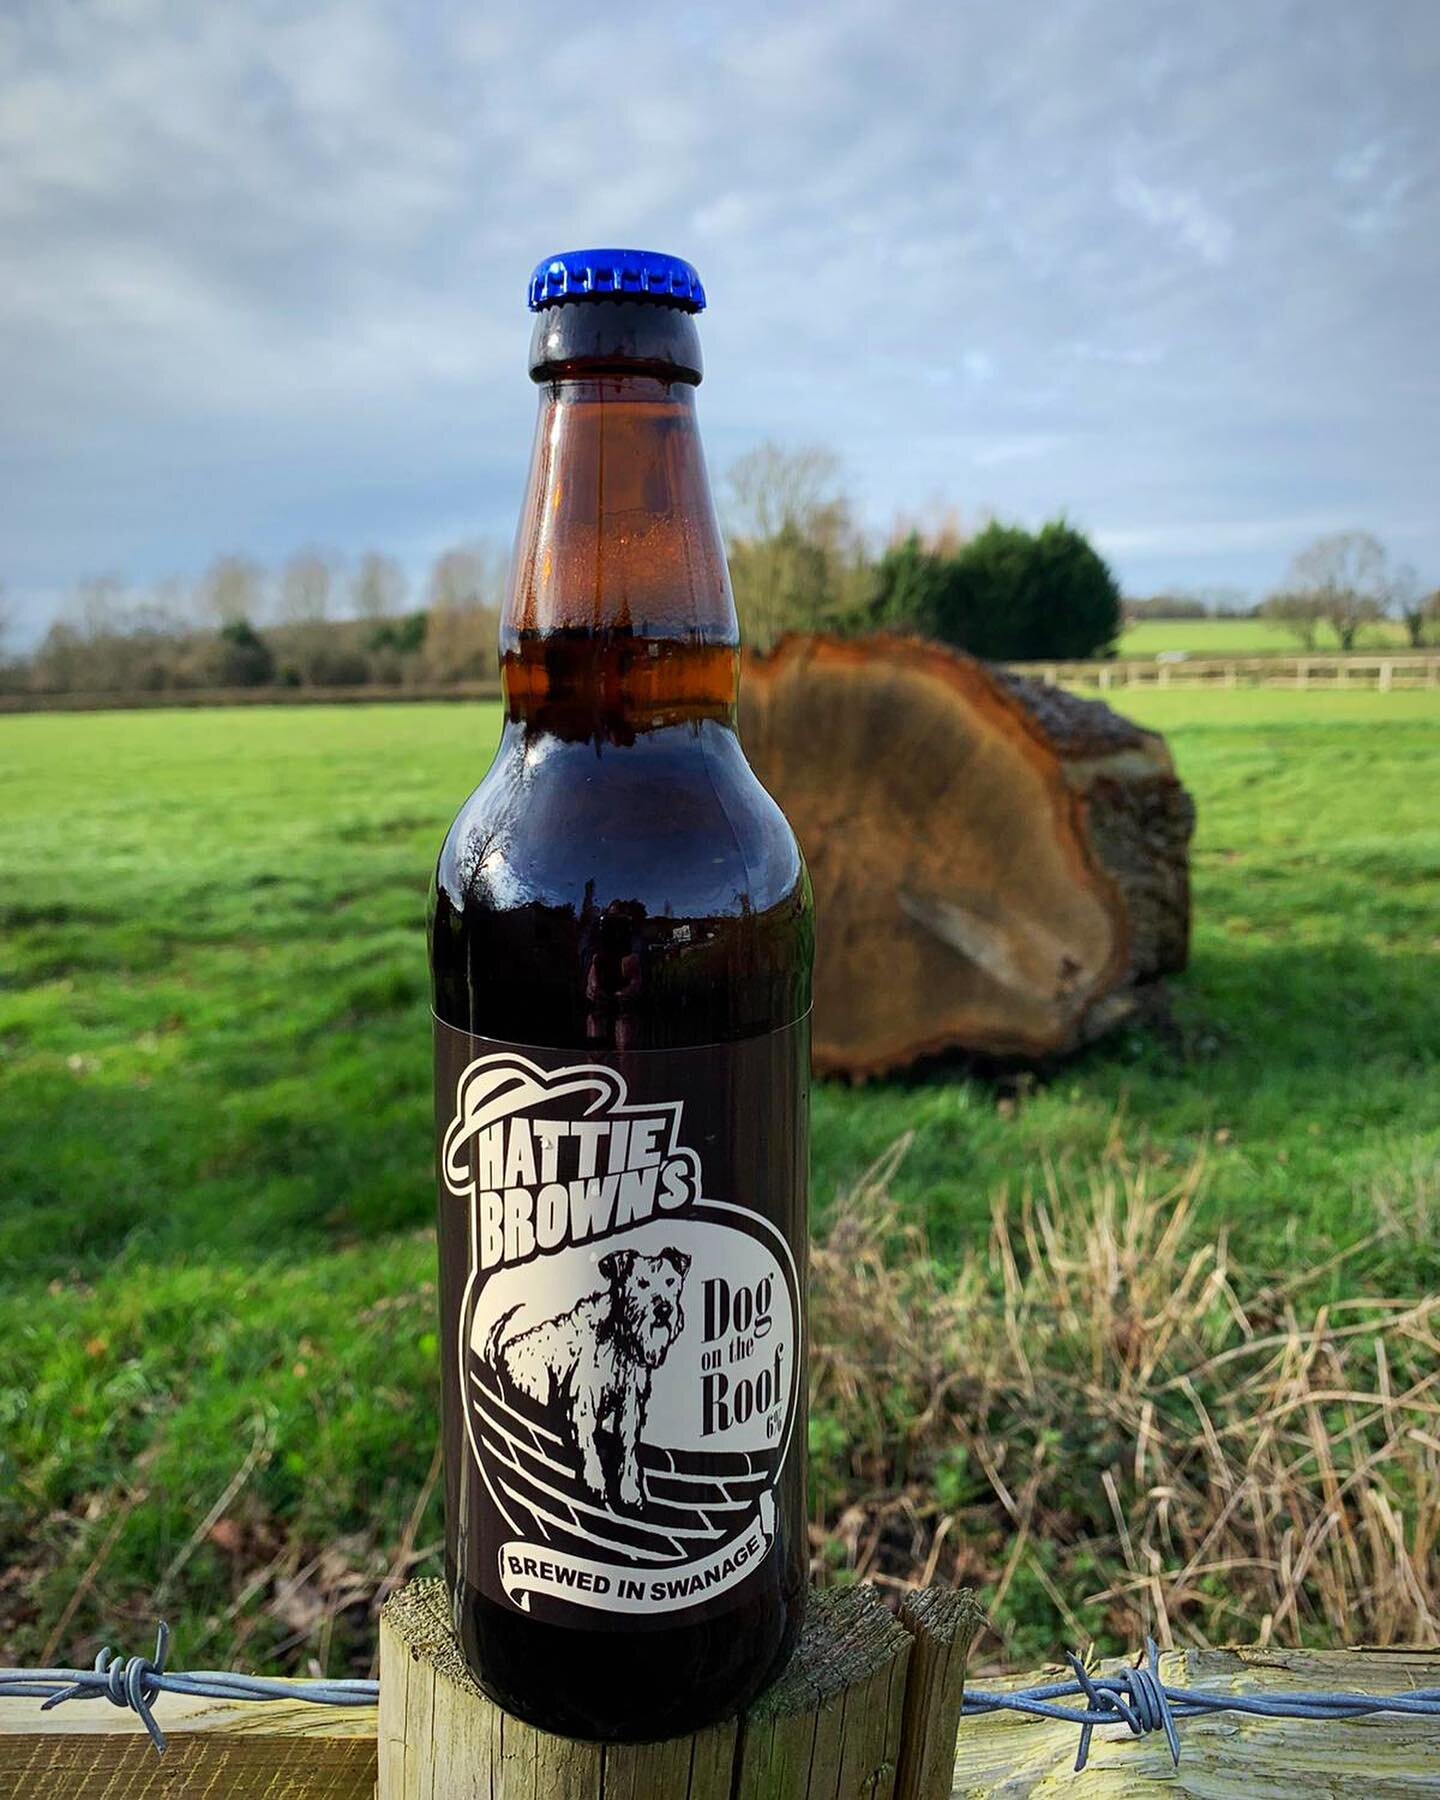 Another beer from our good friends at @hattiebrownsbrewery 

An all time favourite of ours and we&rsquo;re sure it&rsquo;s one of yours as well! 🍻

You&rsquo;re good at Brewing. We&rsquo;re good at Bottling 

#CraftBeerBottling #CraftBeer #Brewery #